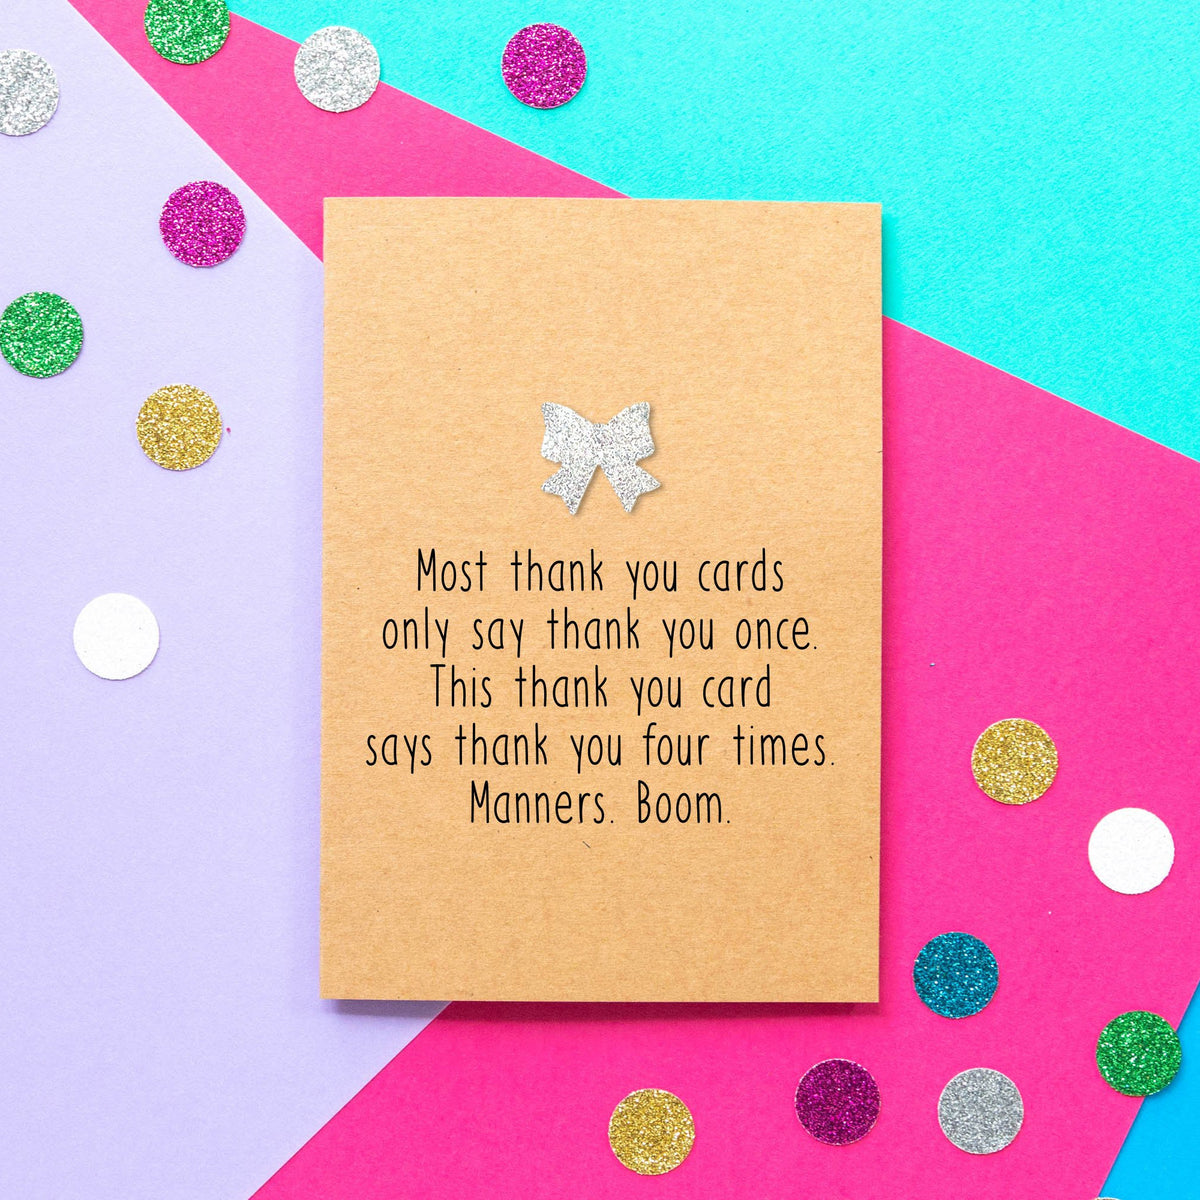 Funny thank you card | Most thank you cards say thank you once. This thank you card says thank you four times. Manners. Boom - Bettie Confetti